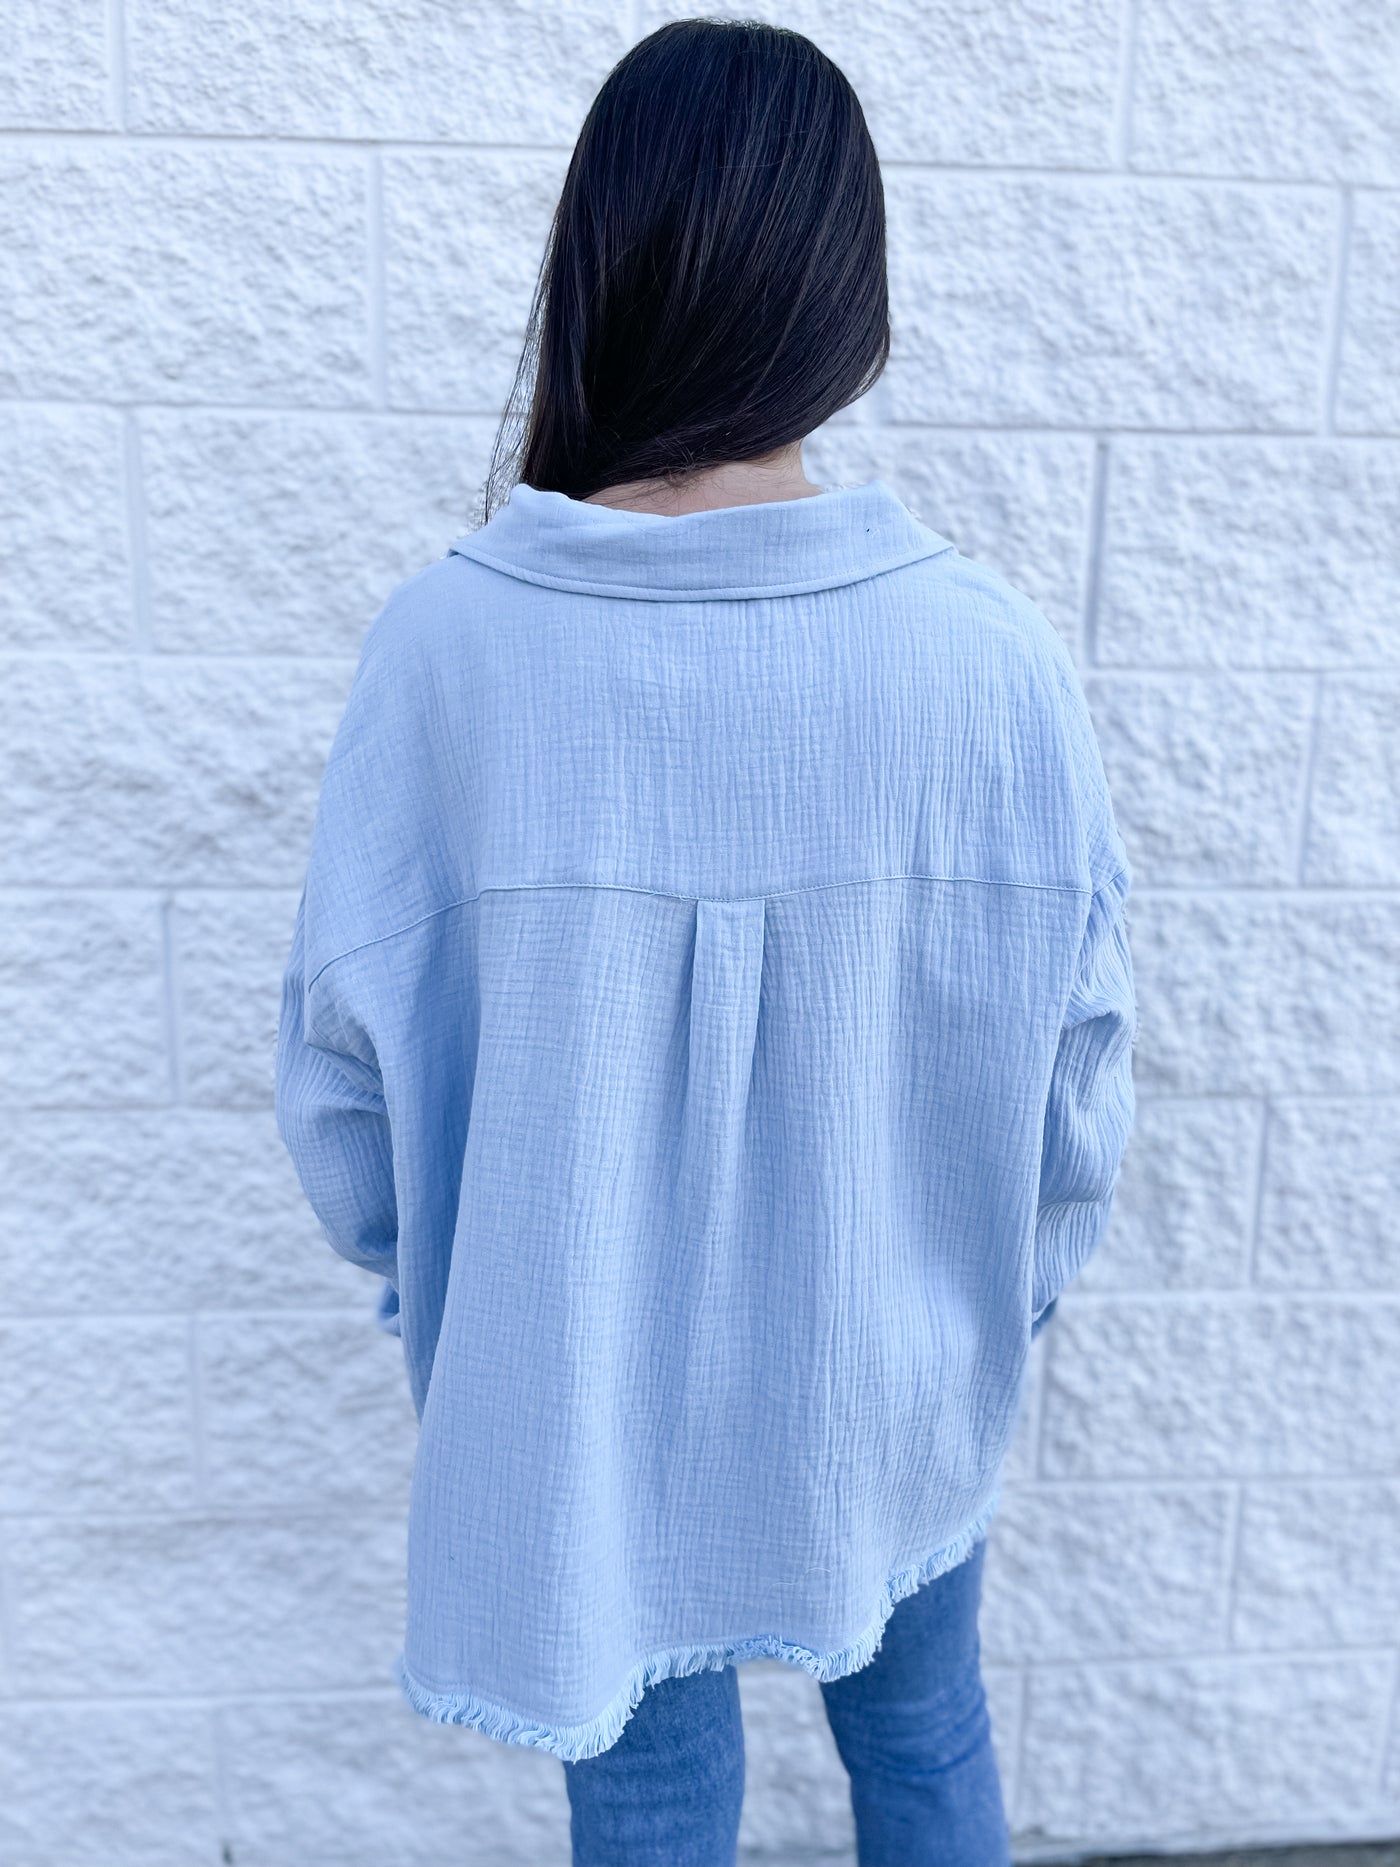 Periwinkle Chrissy Top